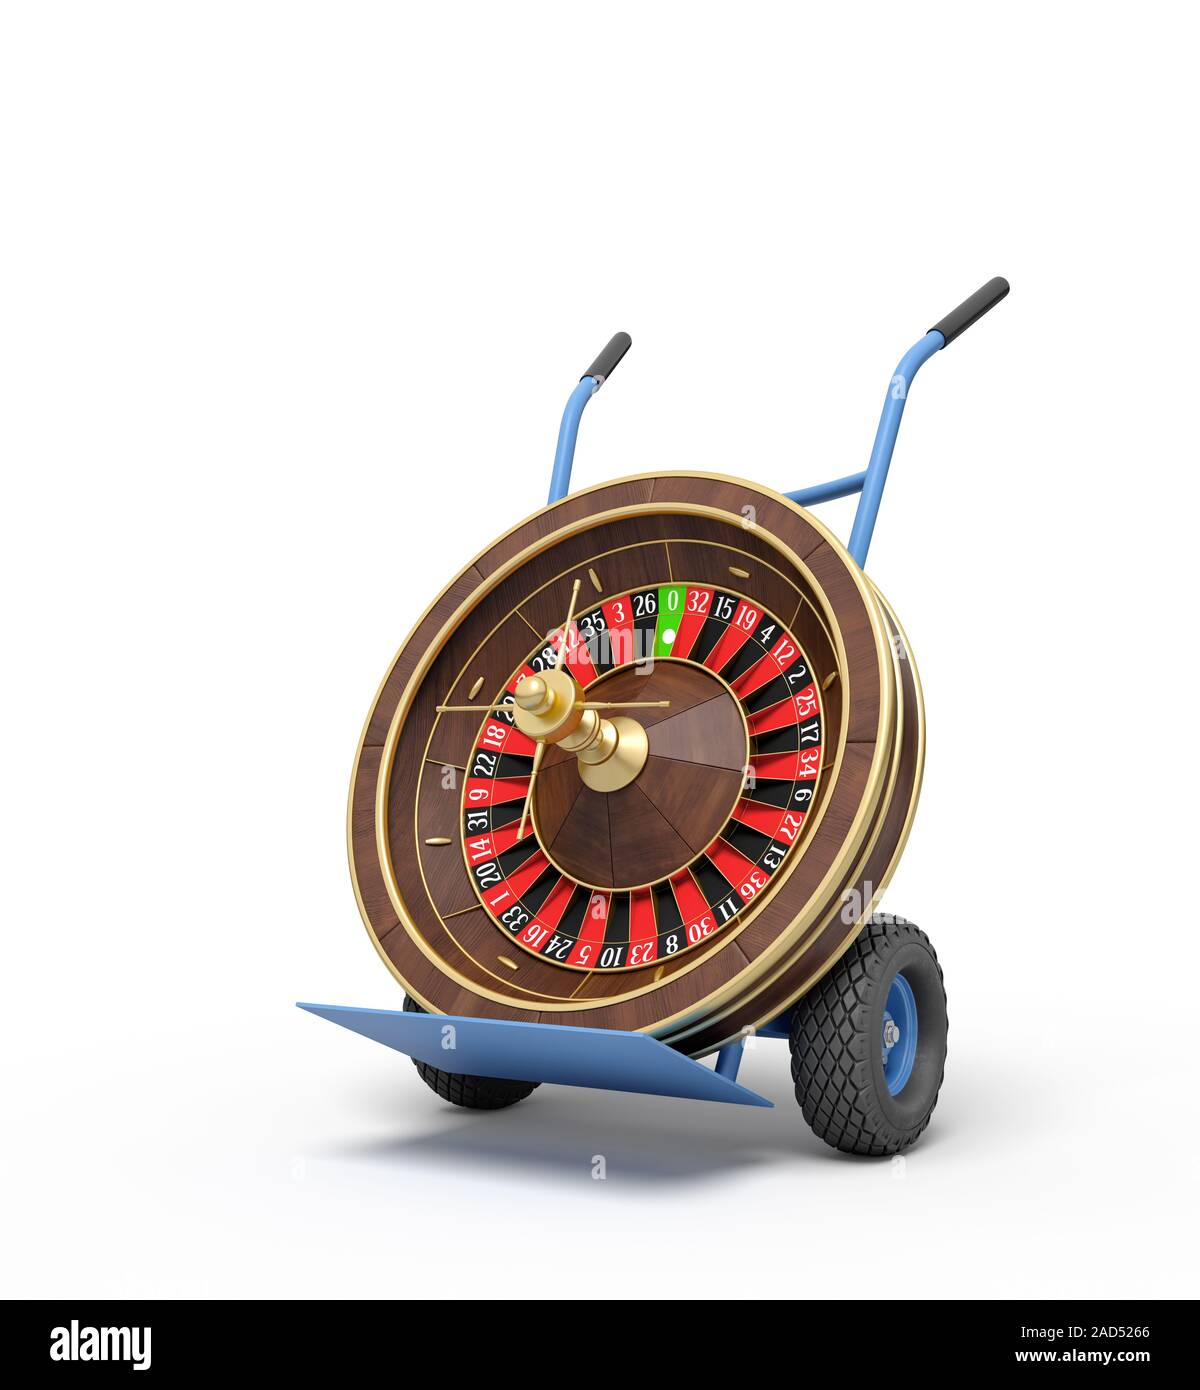 3d rendering of navy blue hand truck standing upright with casino roulette wheel on it. Gambling business. Gambling addiction. Make bets. Stock Photo